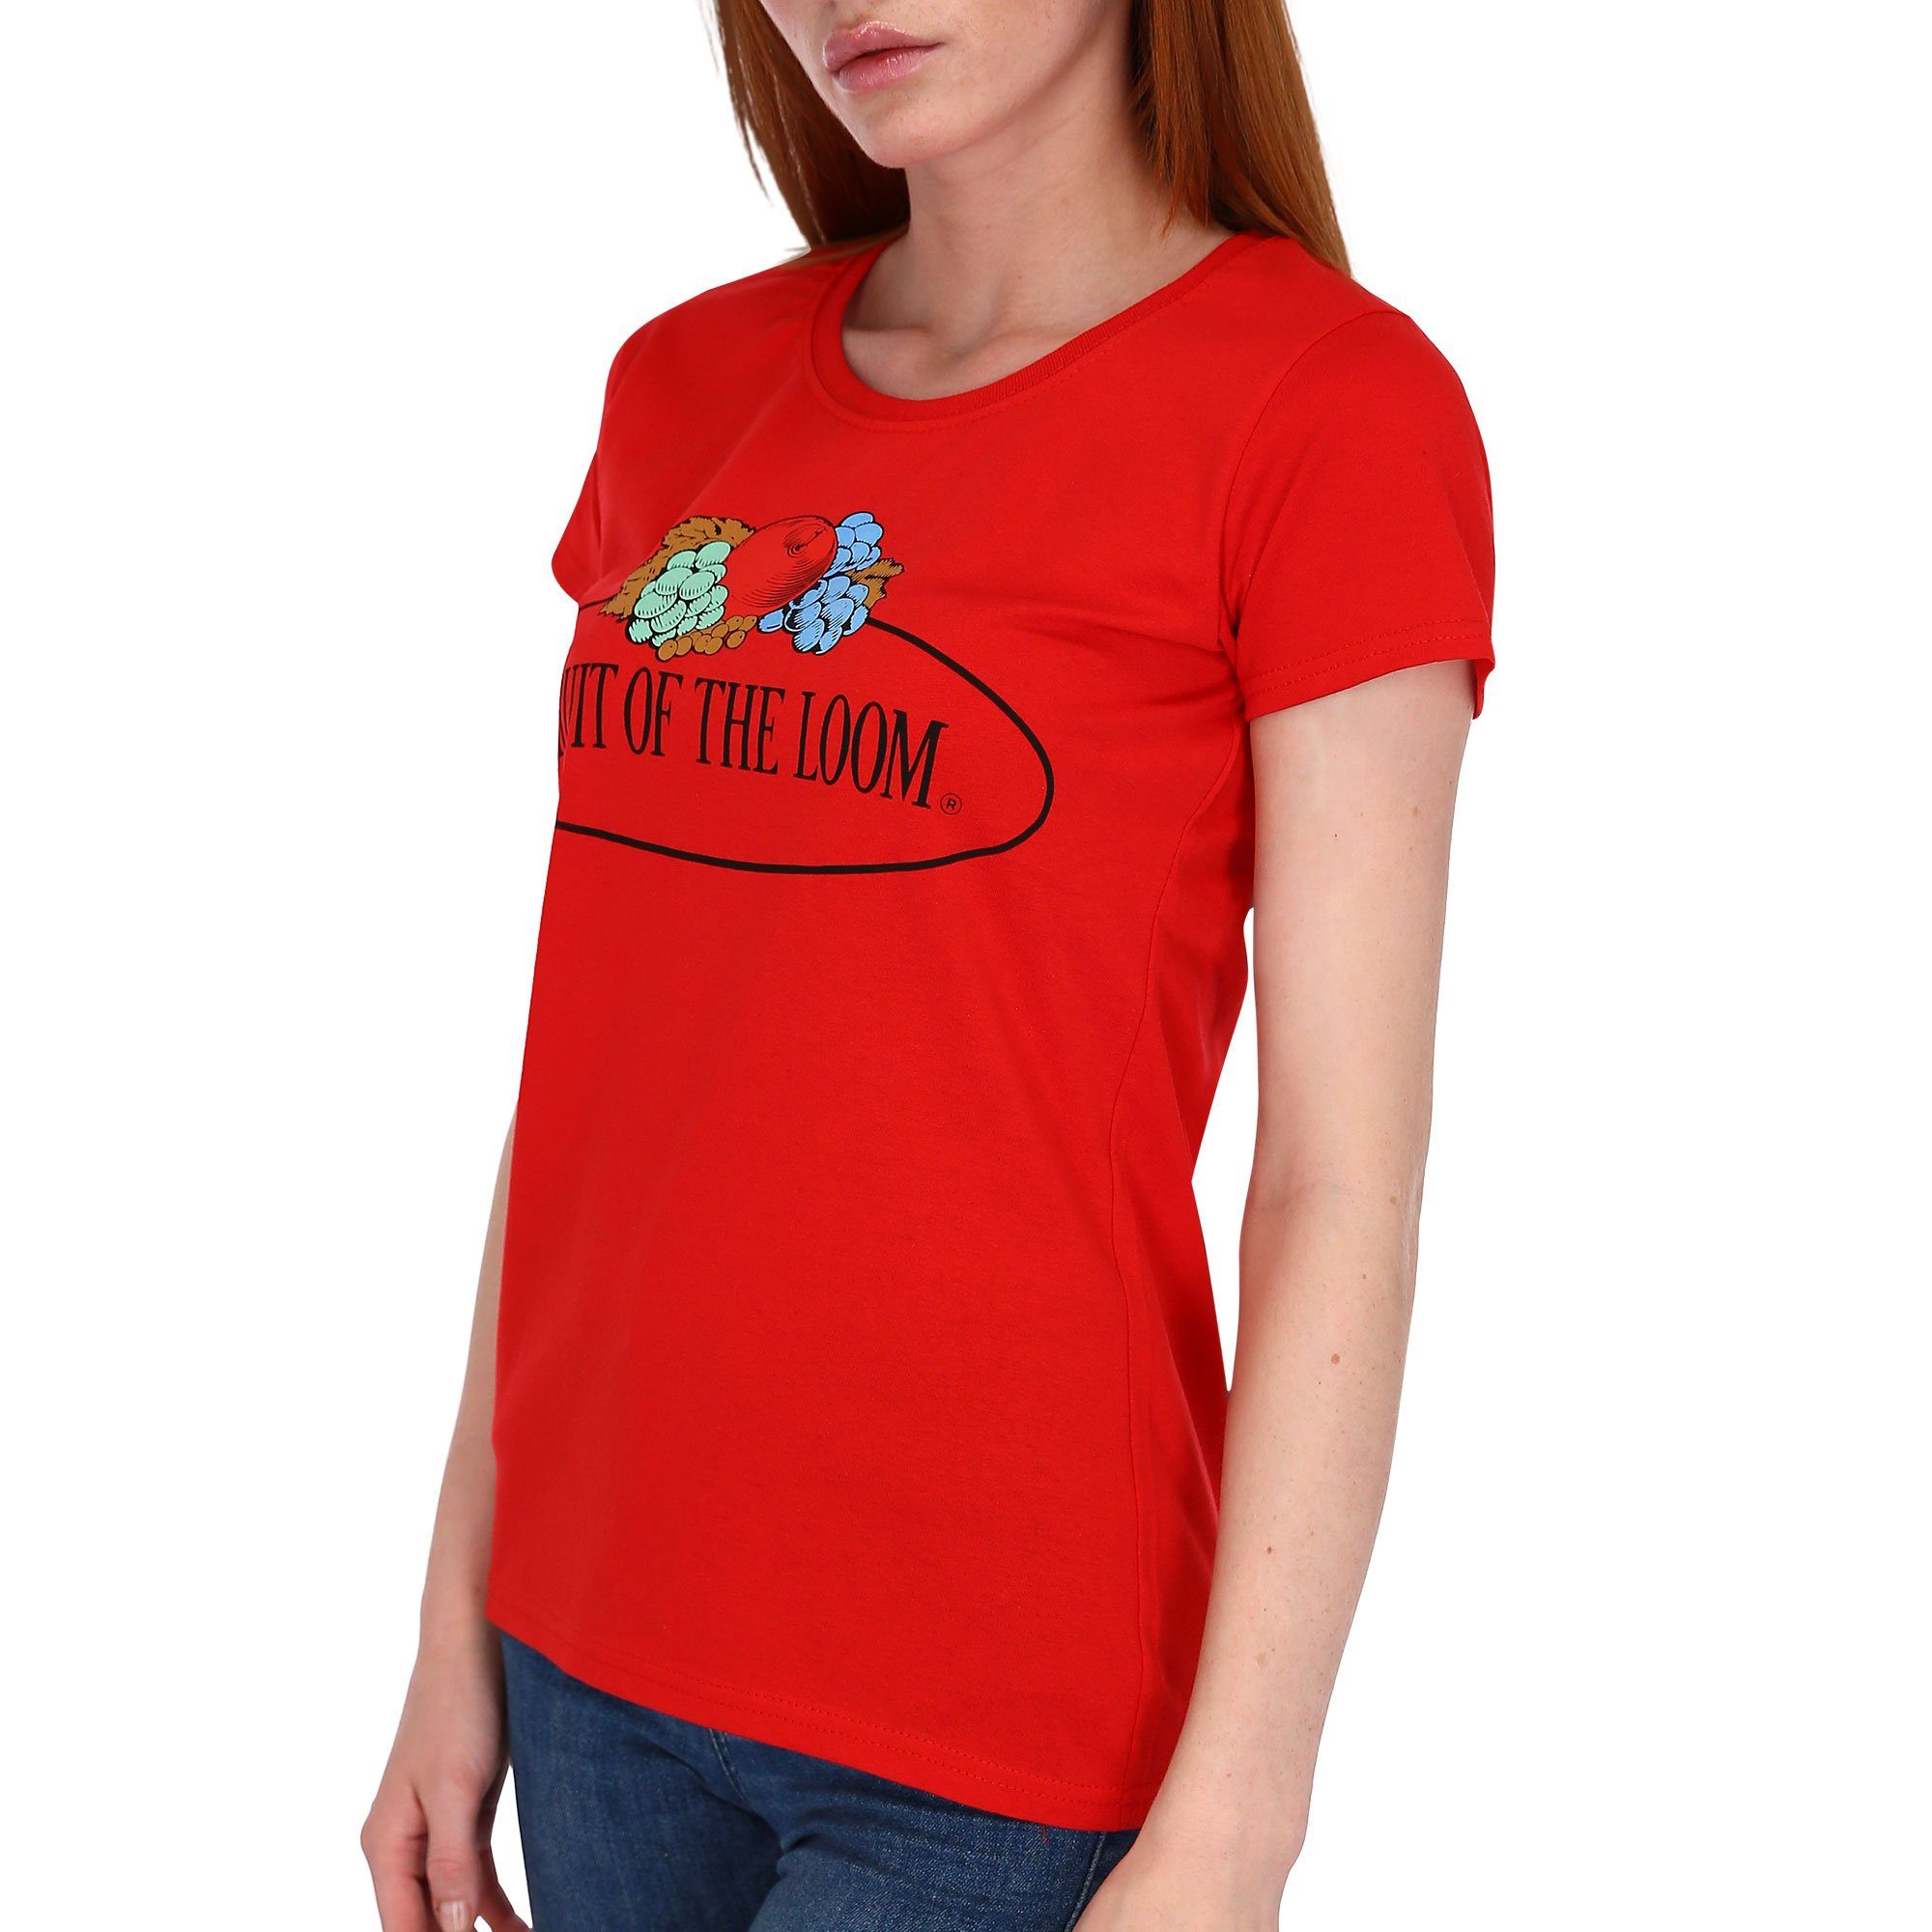 Fruit of the Loom Rundhalsshirt Fruit of the Loom Fruit of the Loom Damen T-Shirt mit Logo rot